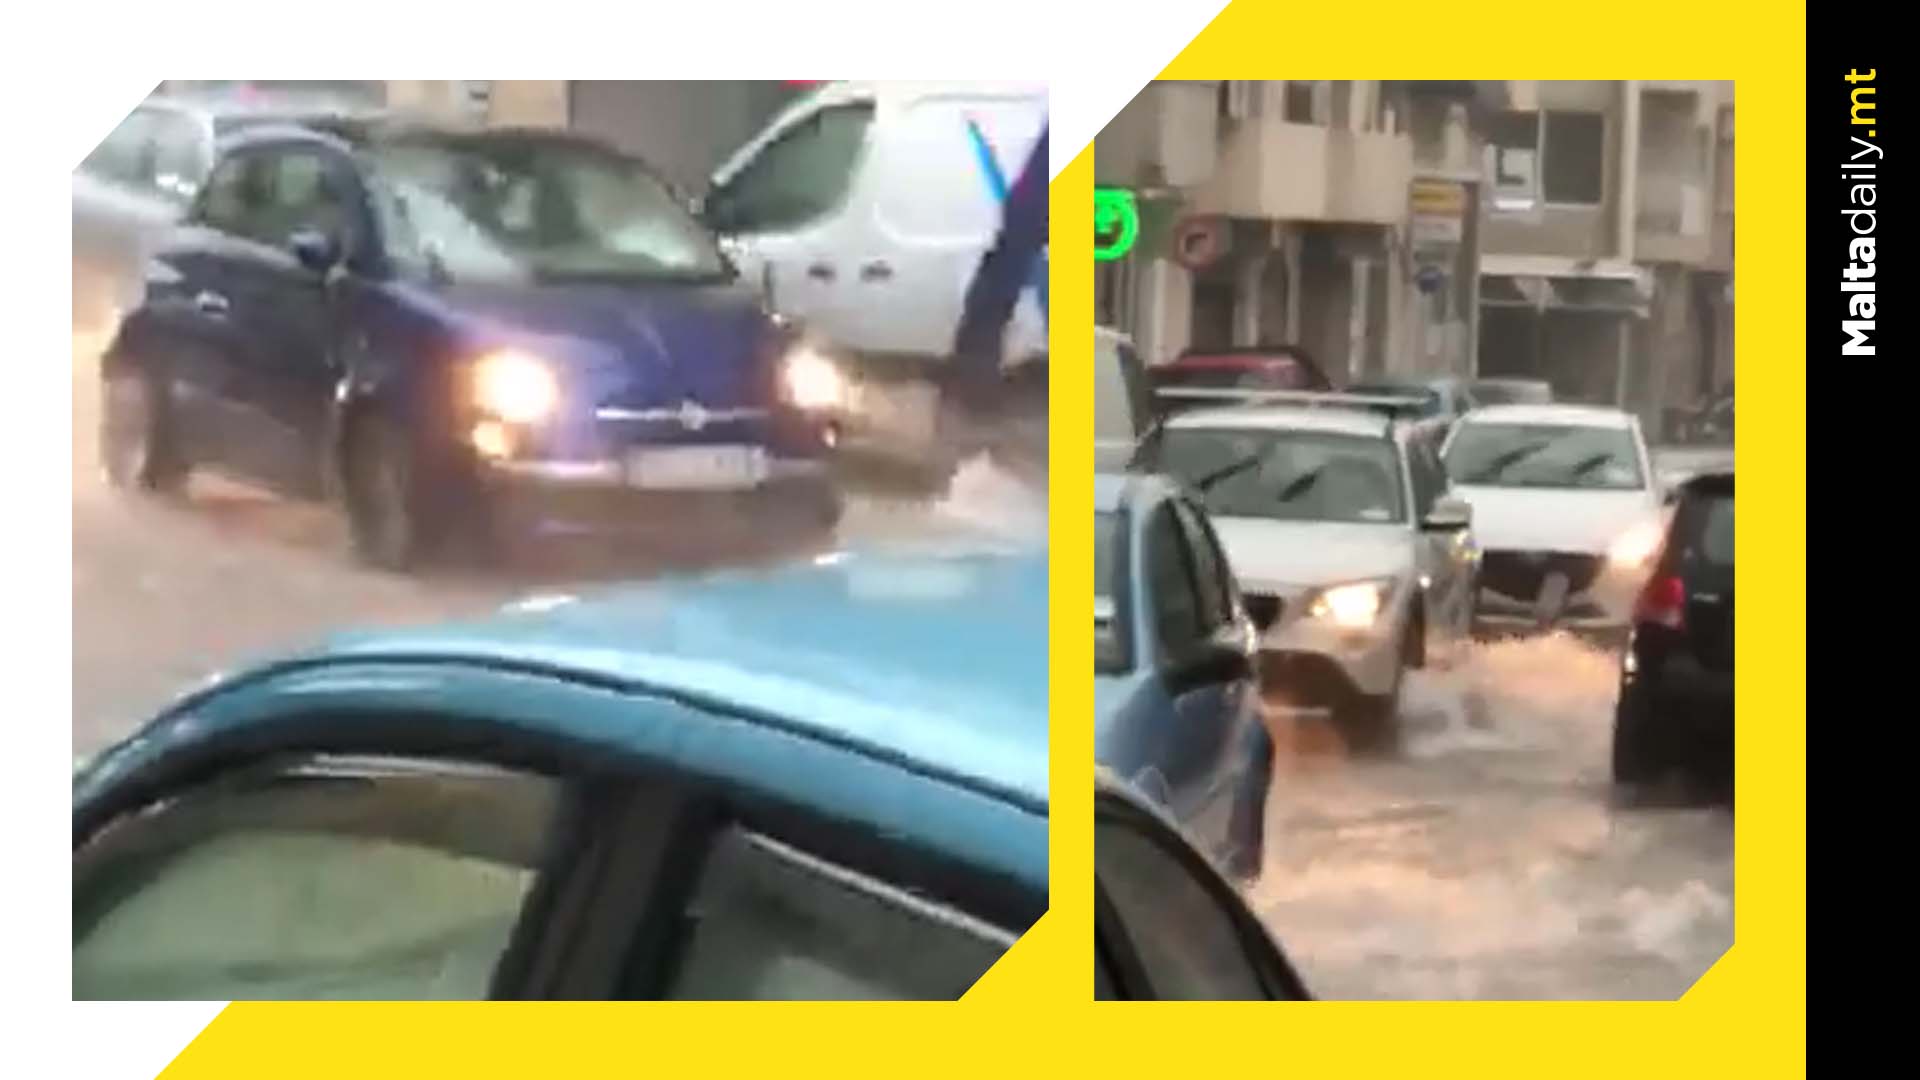 Malta hit with intense storm as roads flood with water